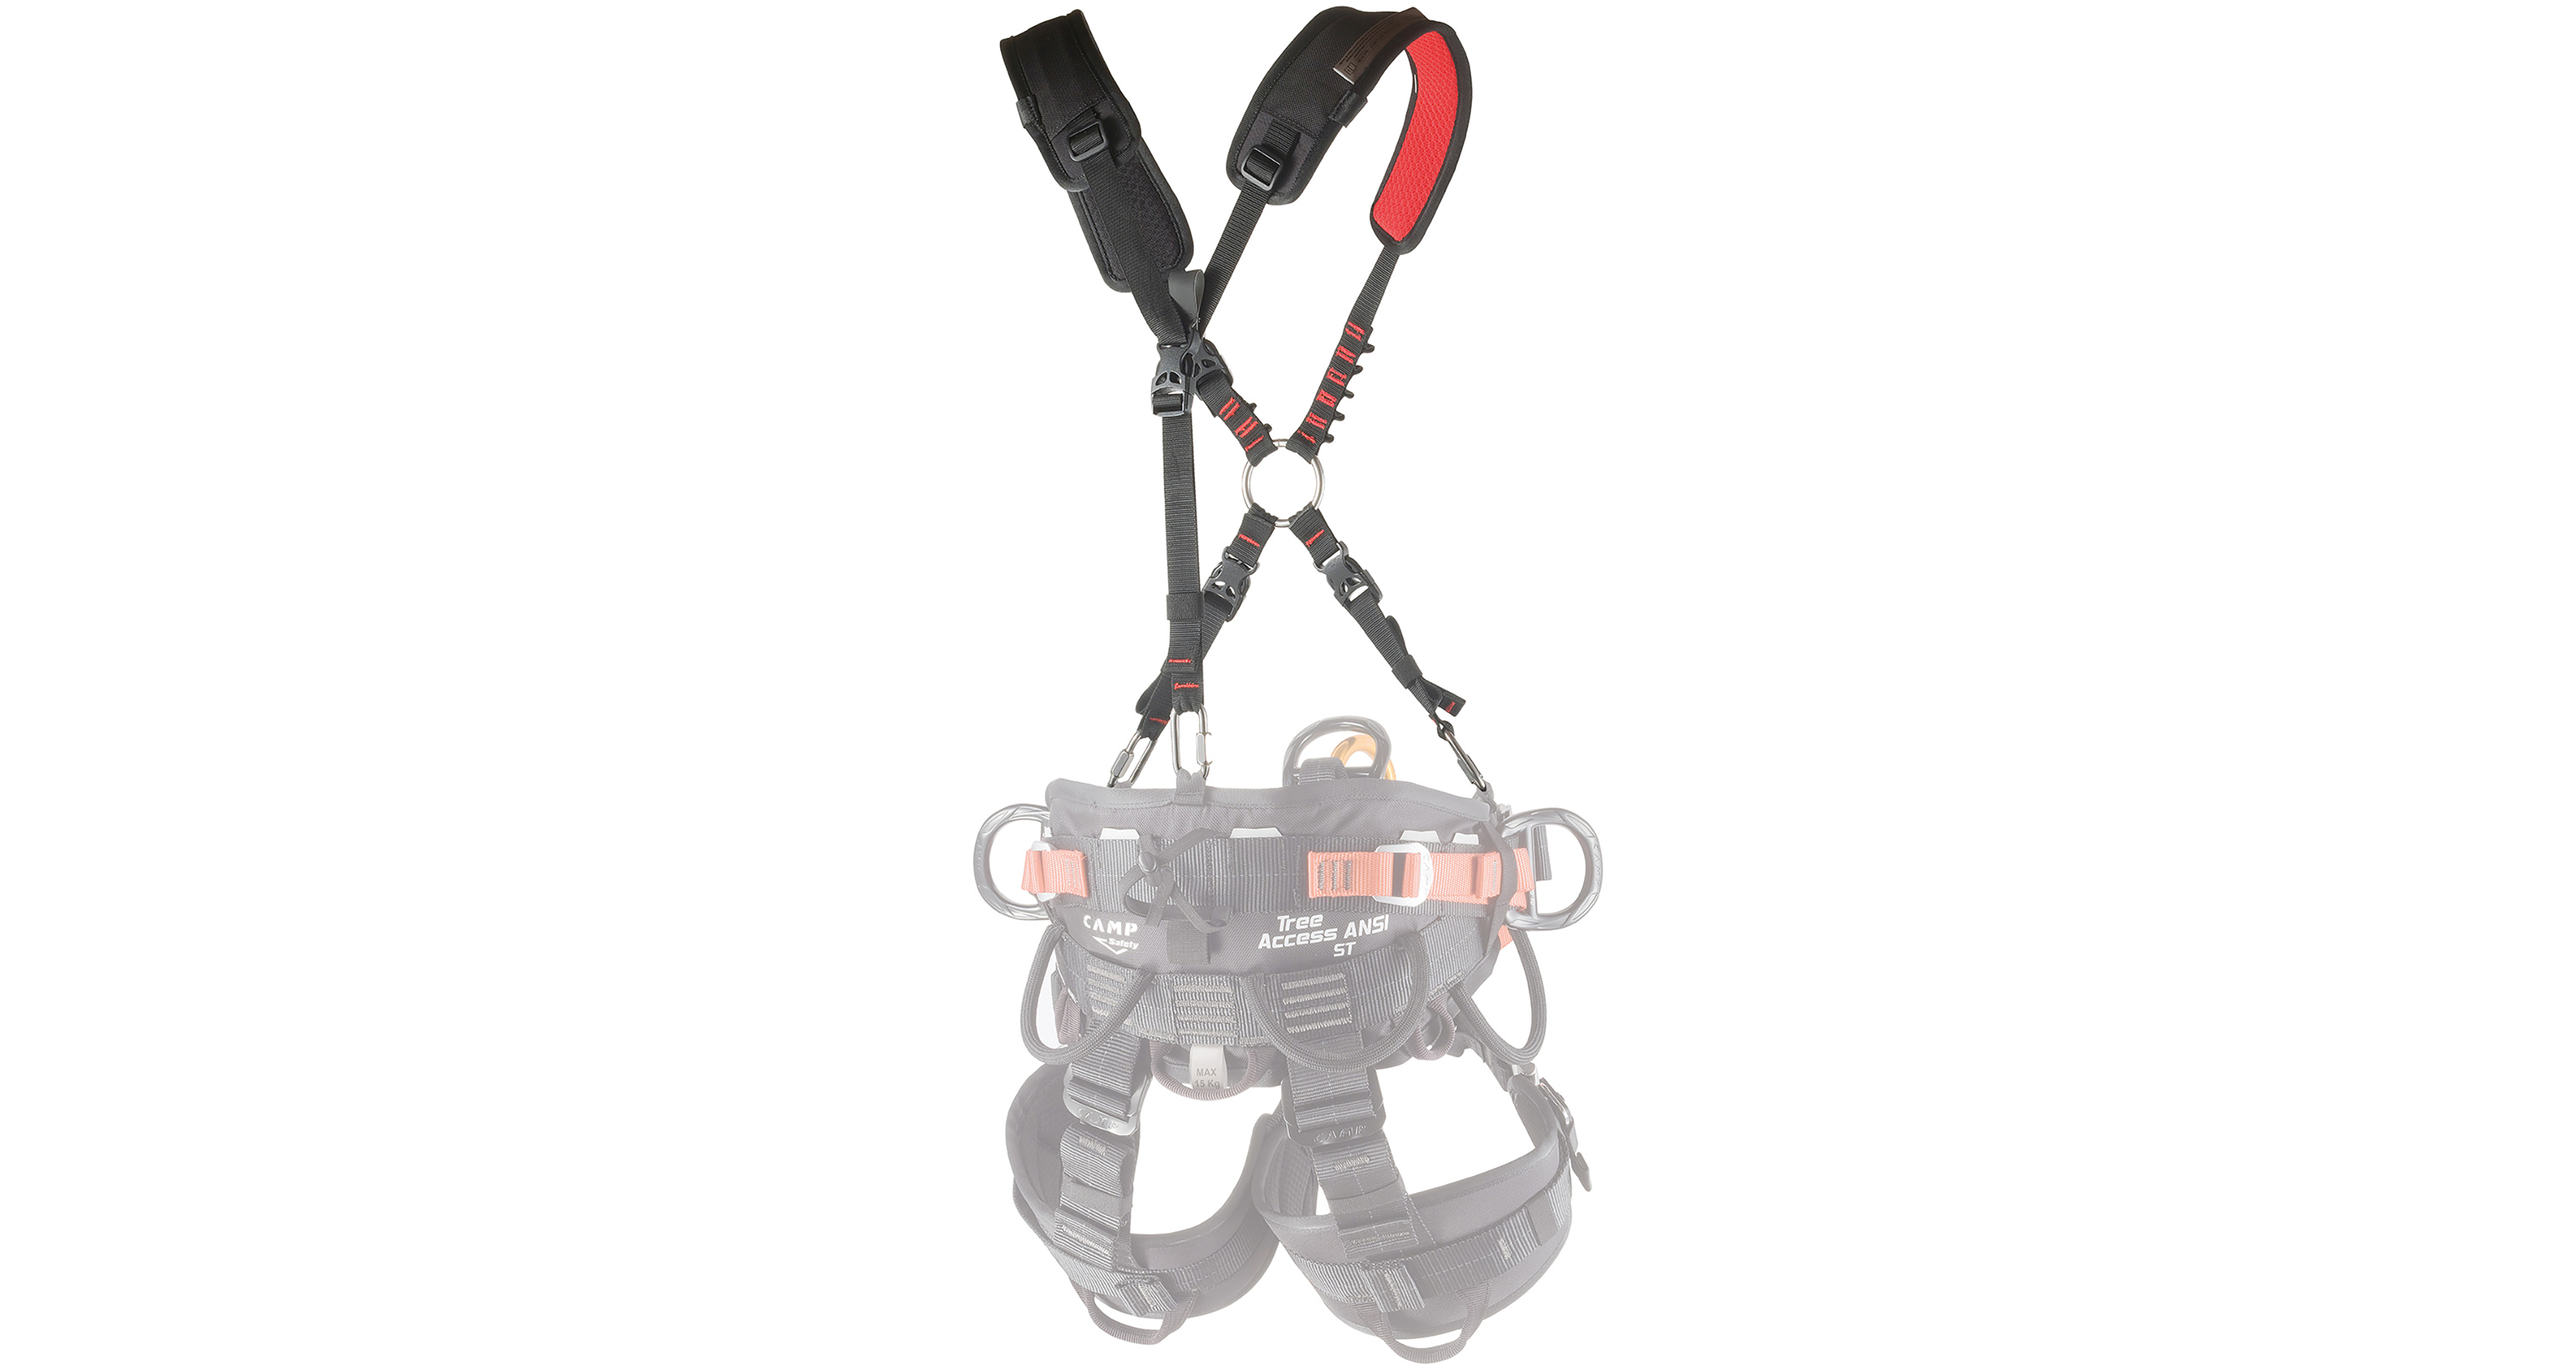 Fall Arrest Shoulder Harness, OSFA Size, Black With Red